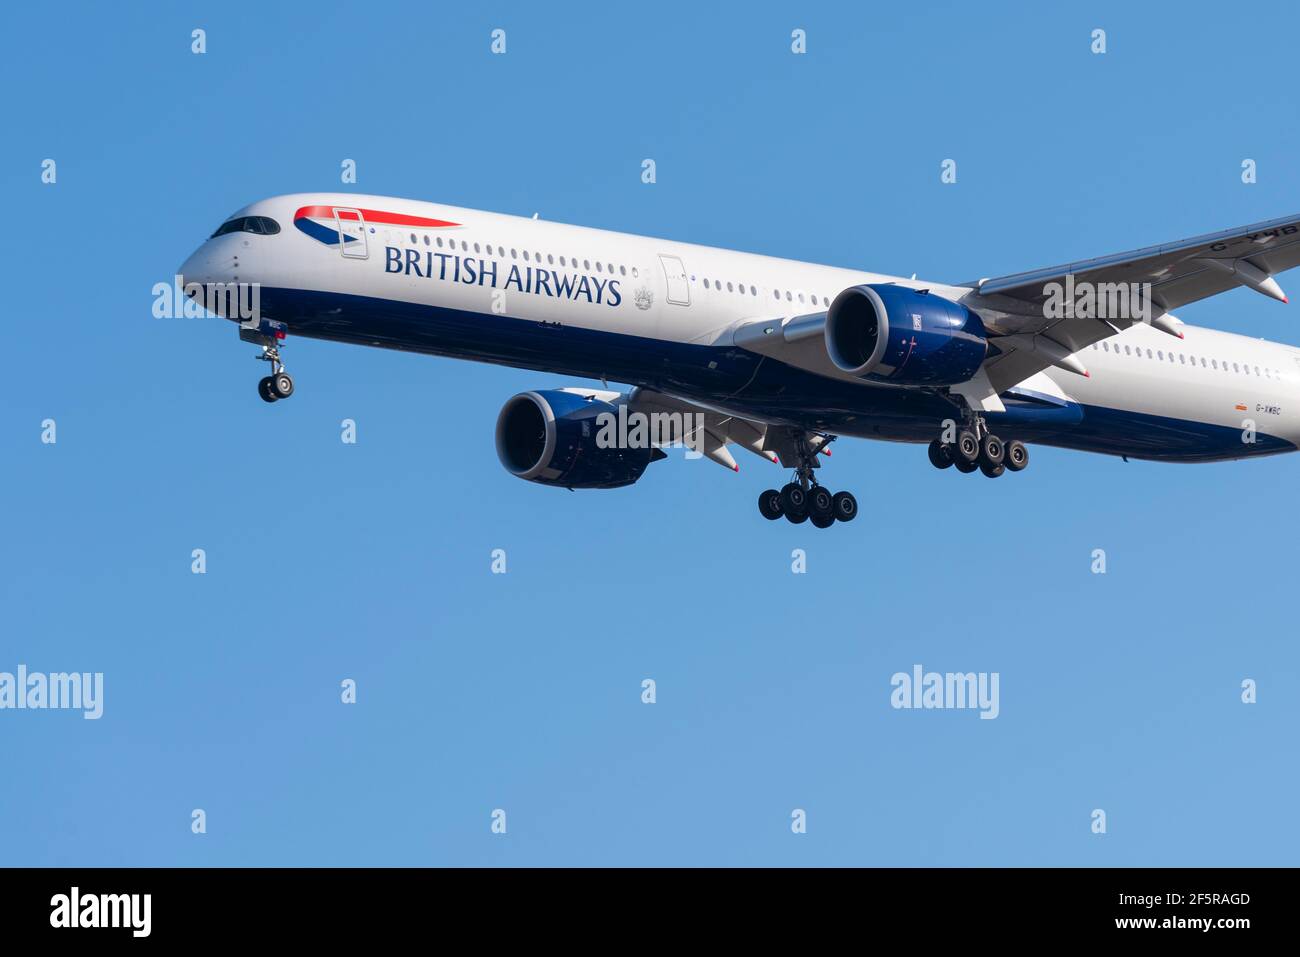 British Airways Airbus A350 jet airliner plane G-XWBC on finals to land at London Heathrow Airport, UK, in blue sky. BA, part of IAG. Flag carrier Stock Photo